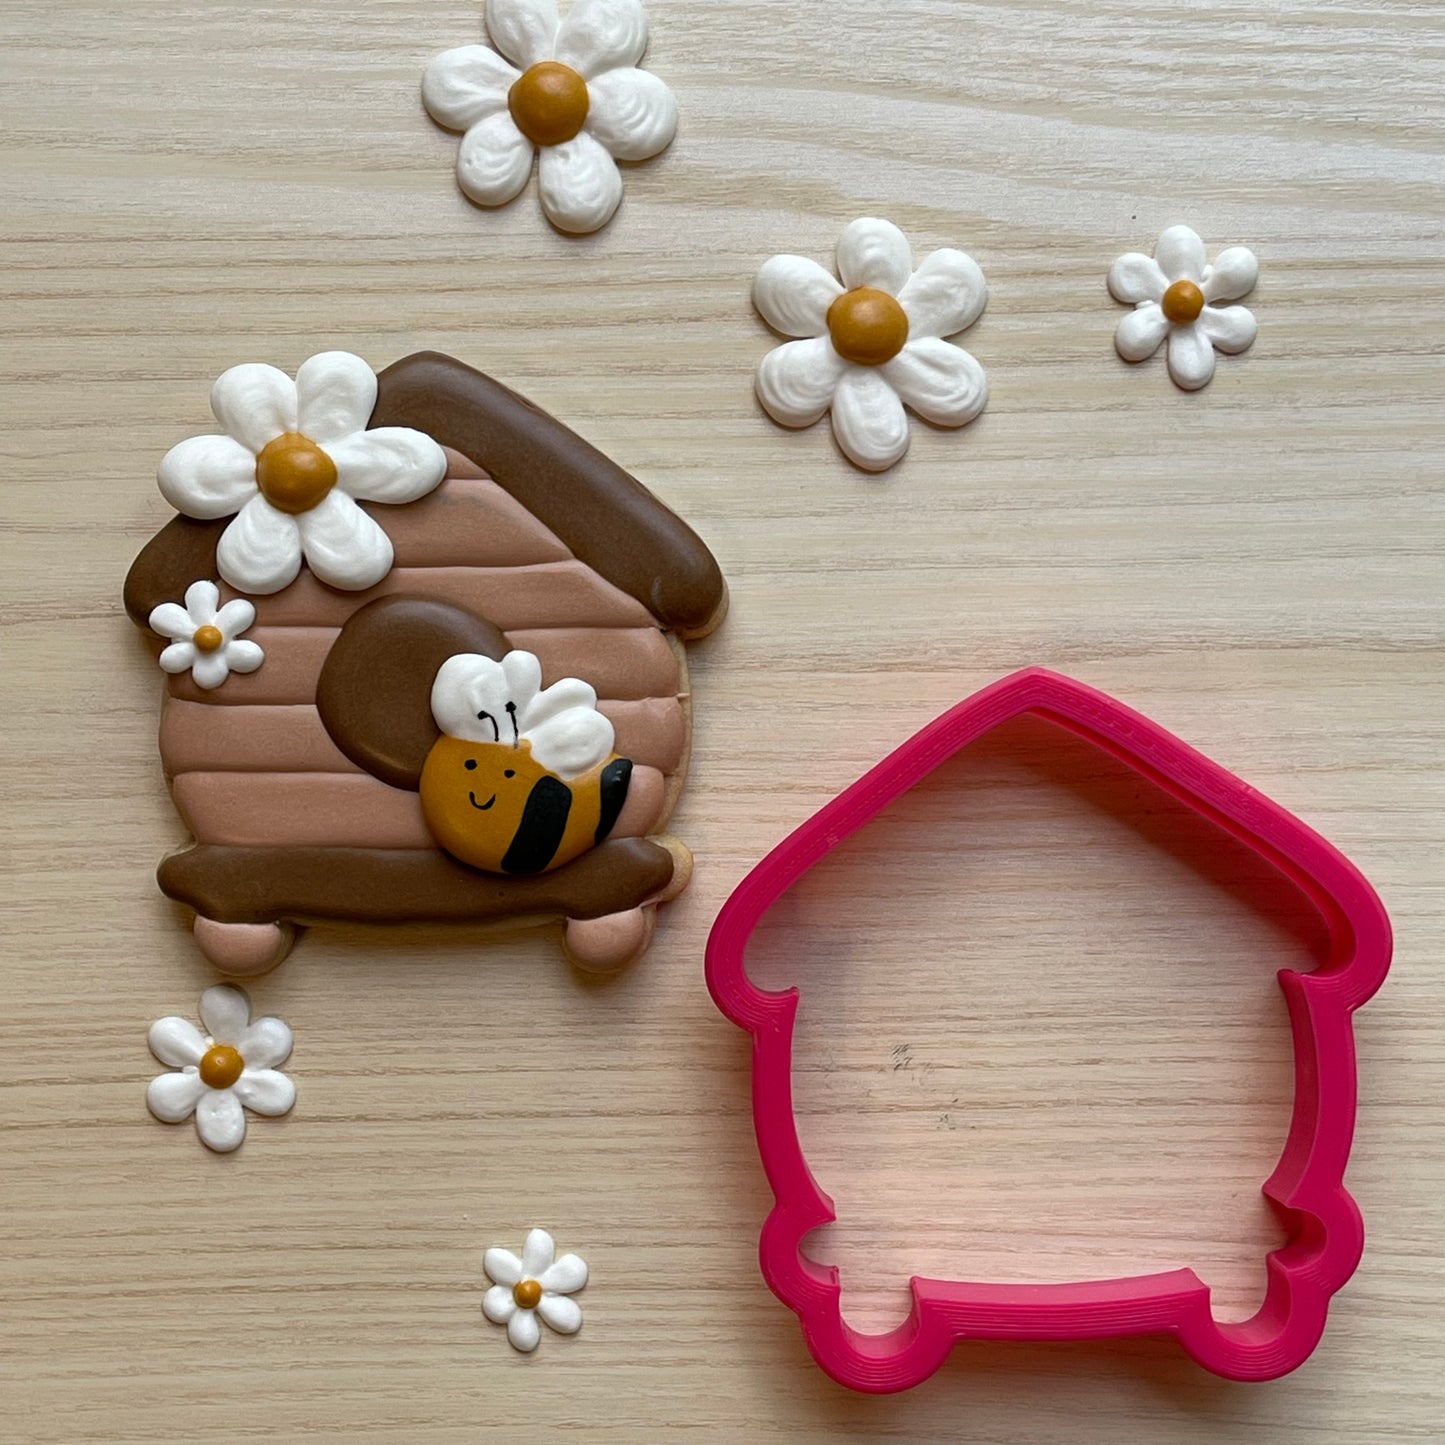 Bee house cookie cutter